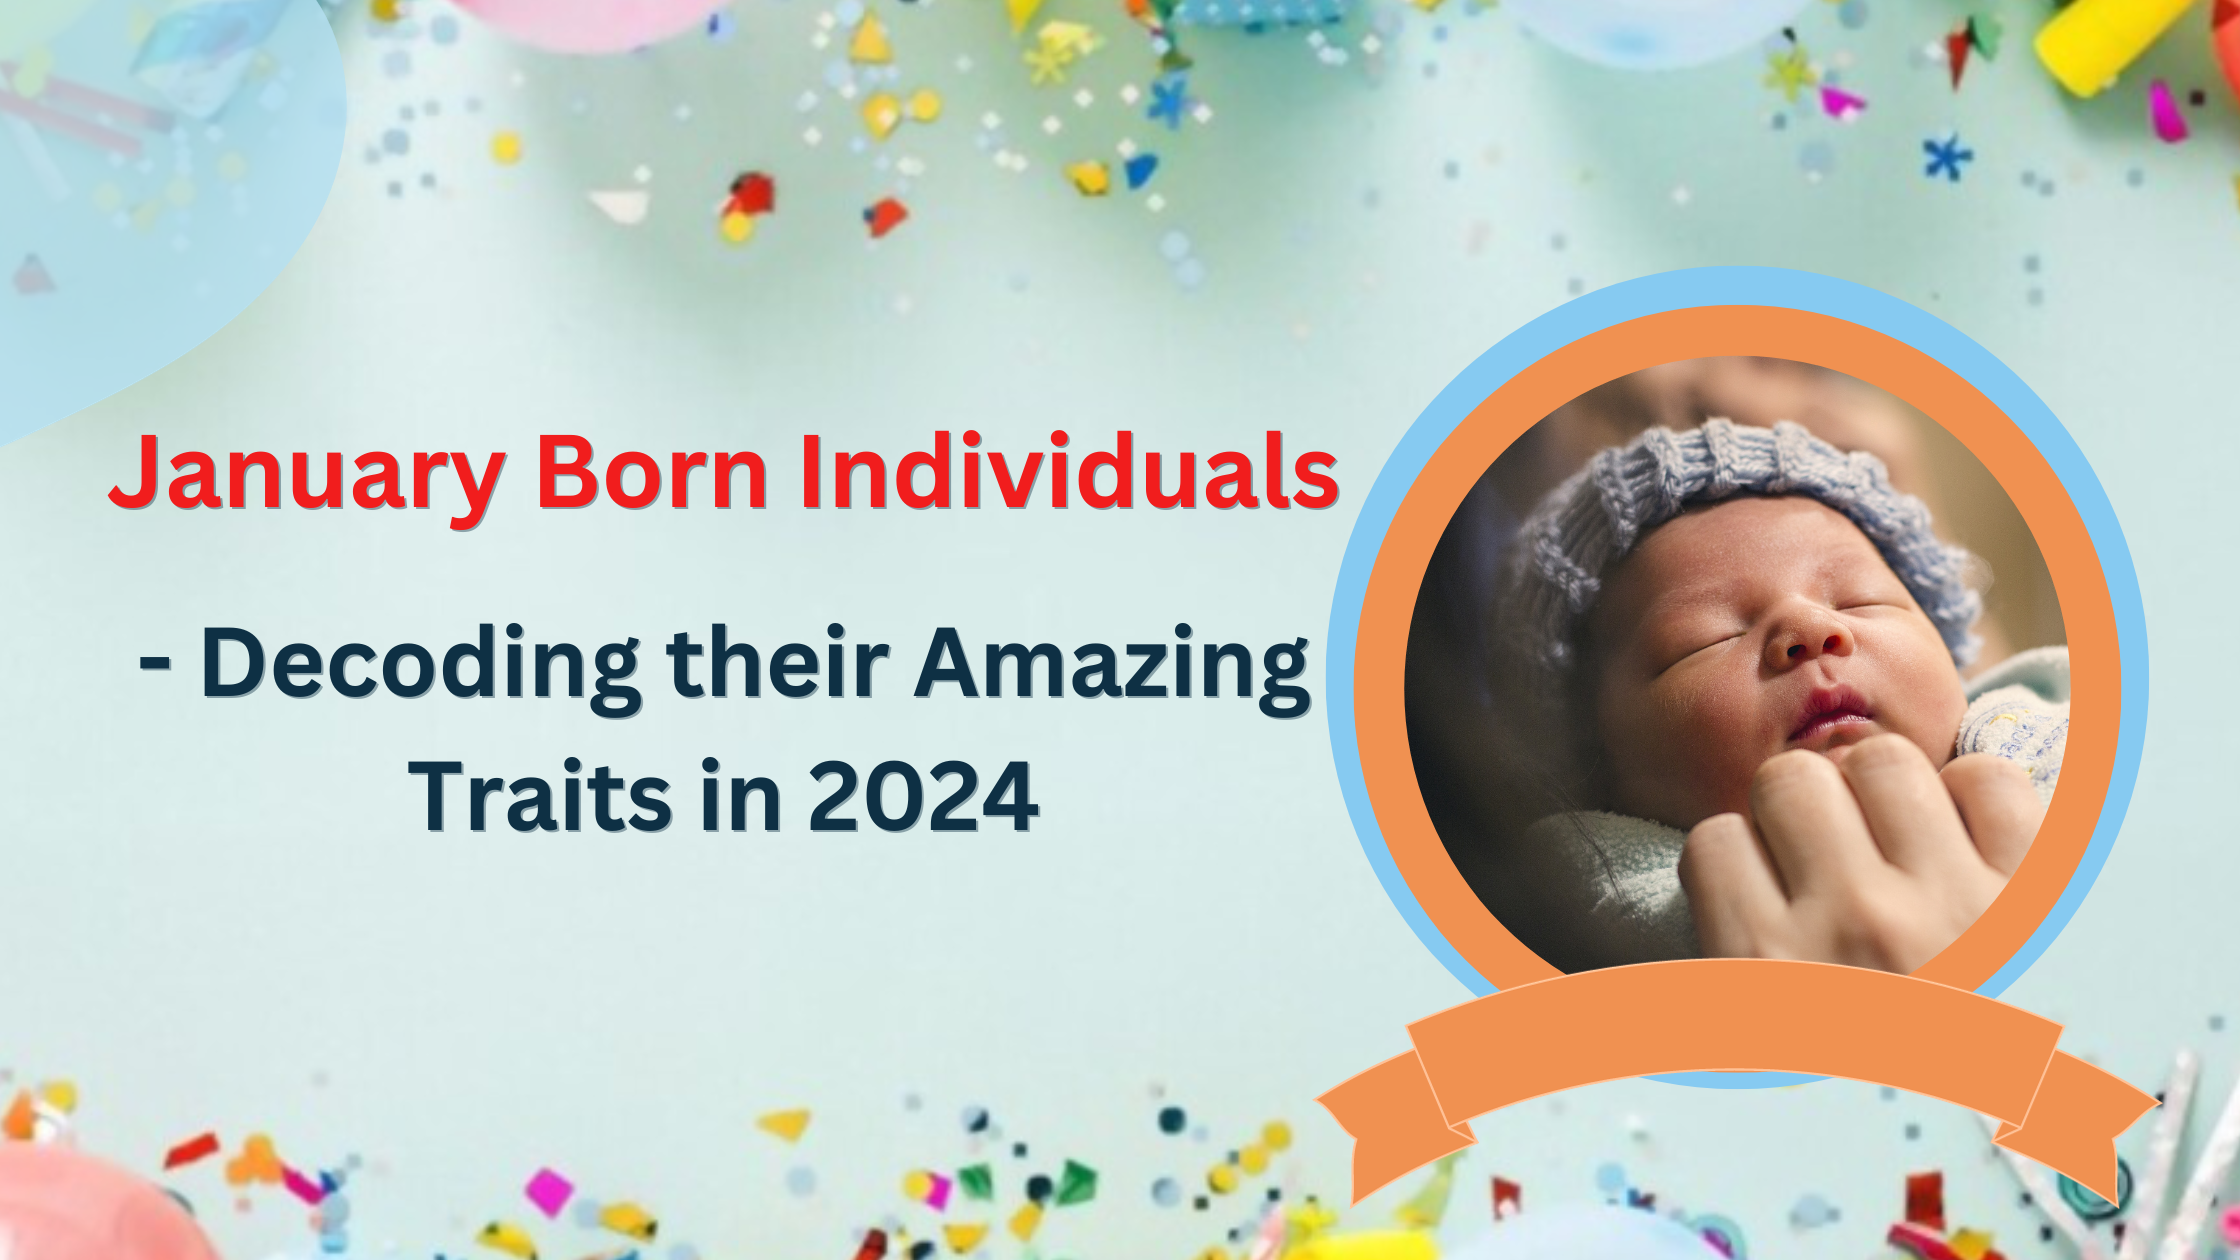 January Born Individuals- Decoding their Amazing Traits in 2024